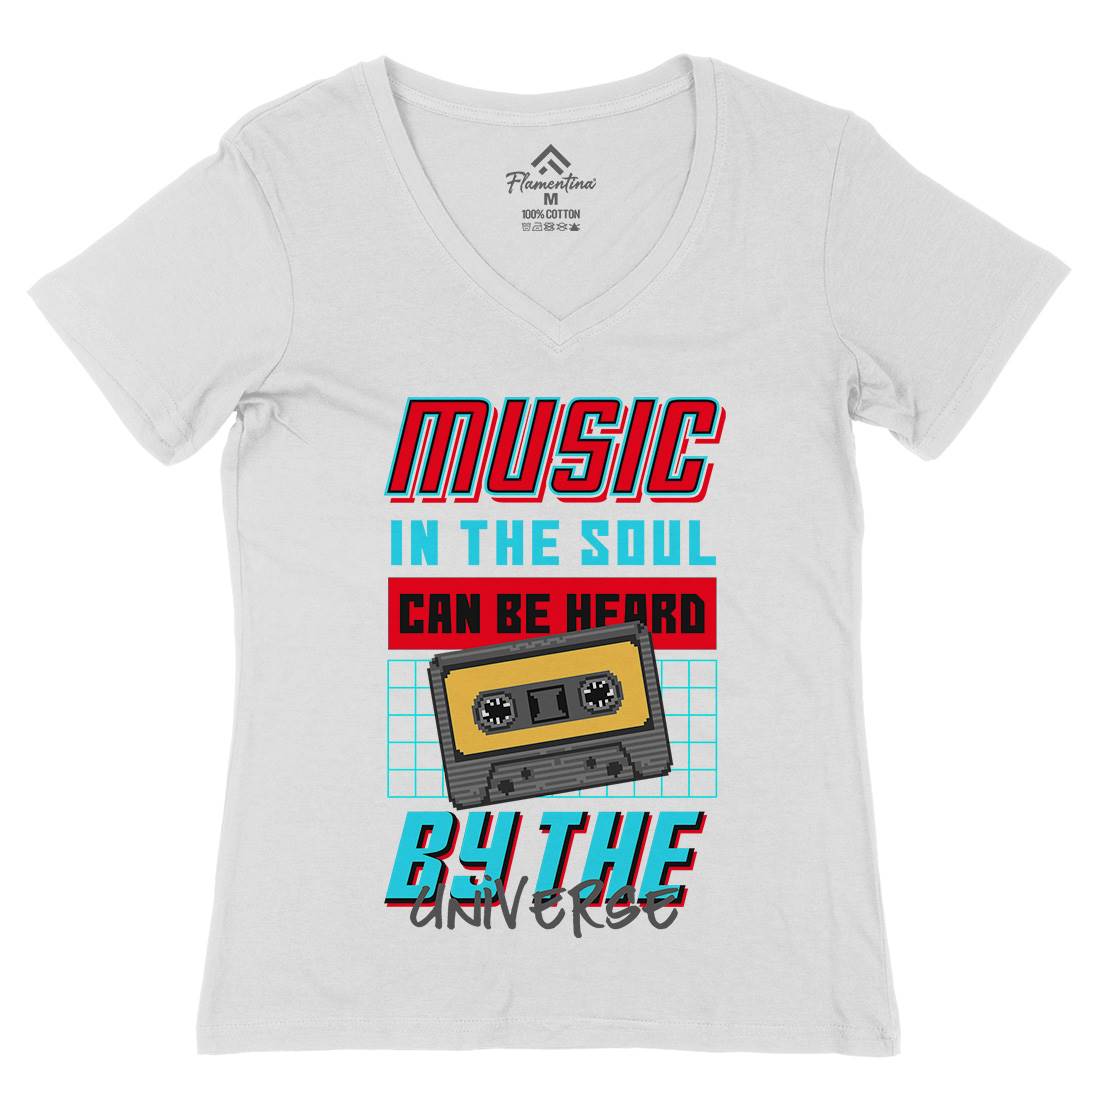 In The Soul Can Be Heard By The Universe Womens Organic V-Neck T-Shirt Music B935